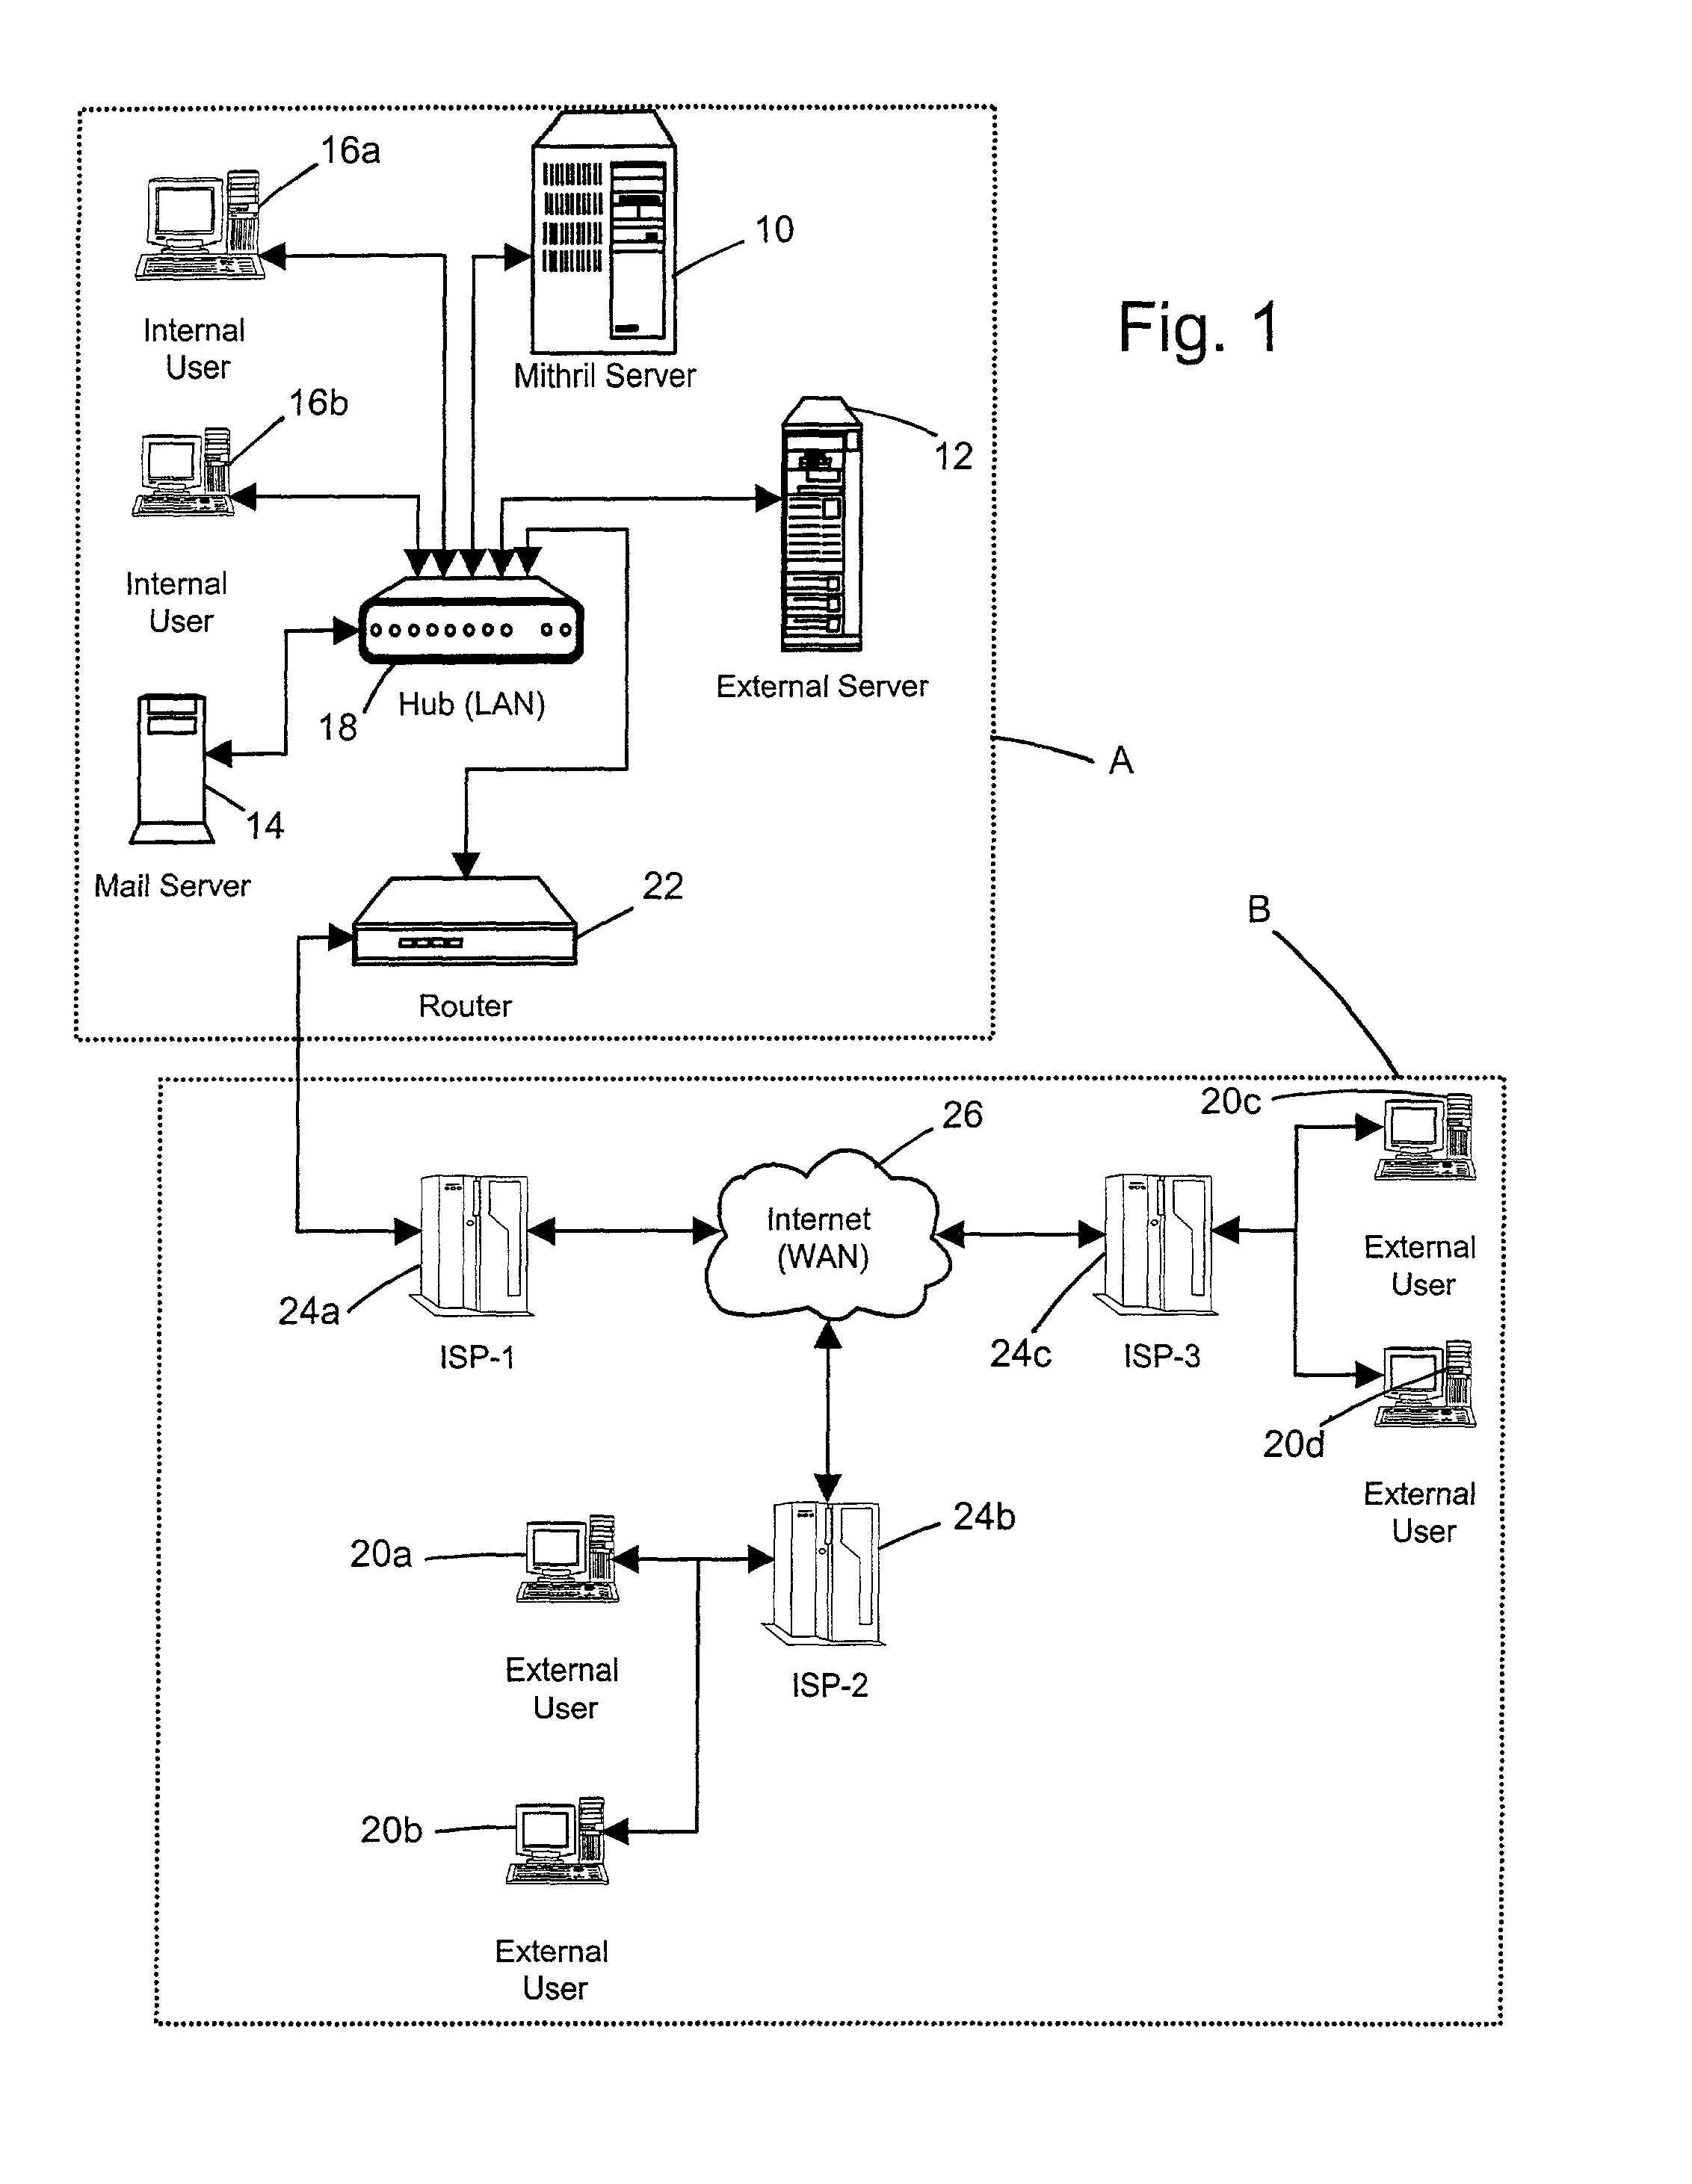 System and method for computerized global messaging encryption